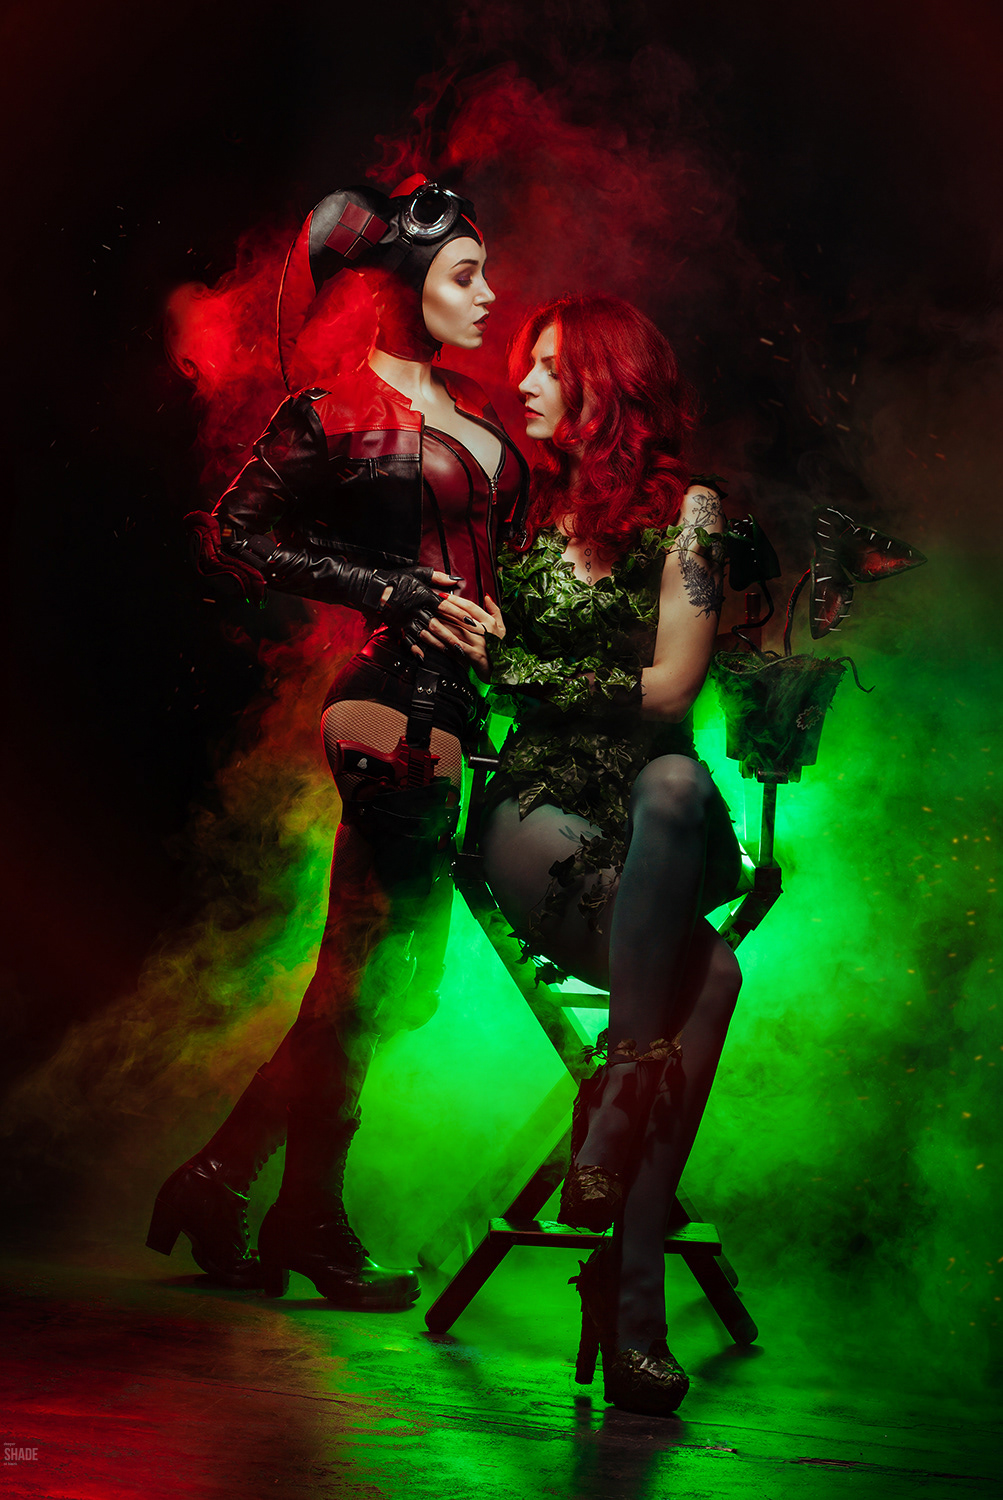 Poison ivy cosplay and harley quinn 10 Poison